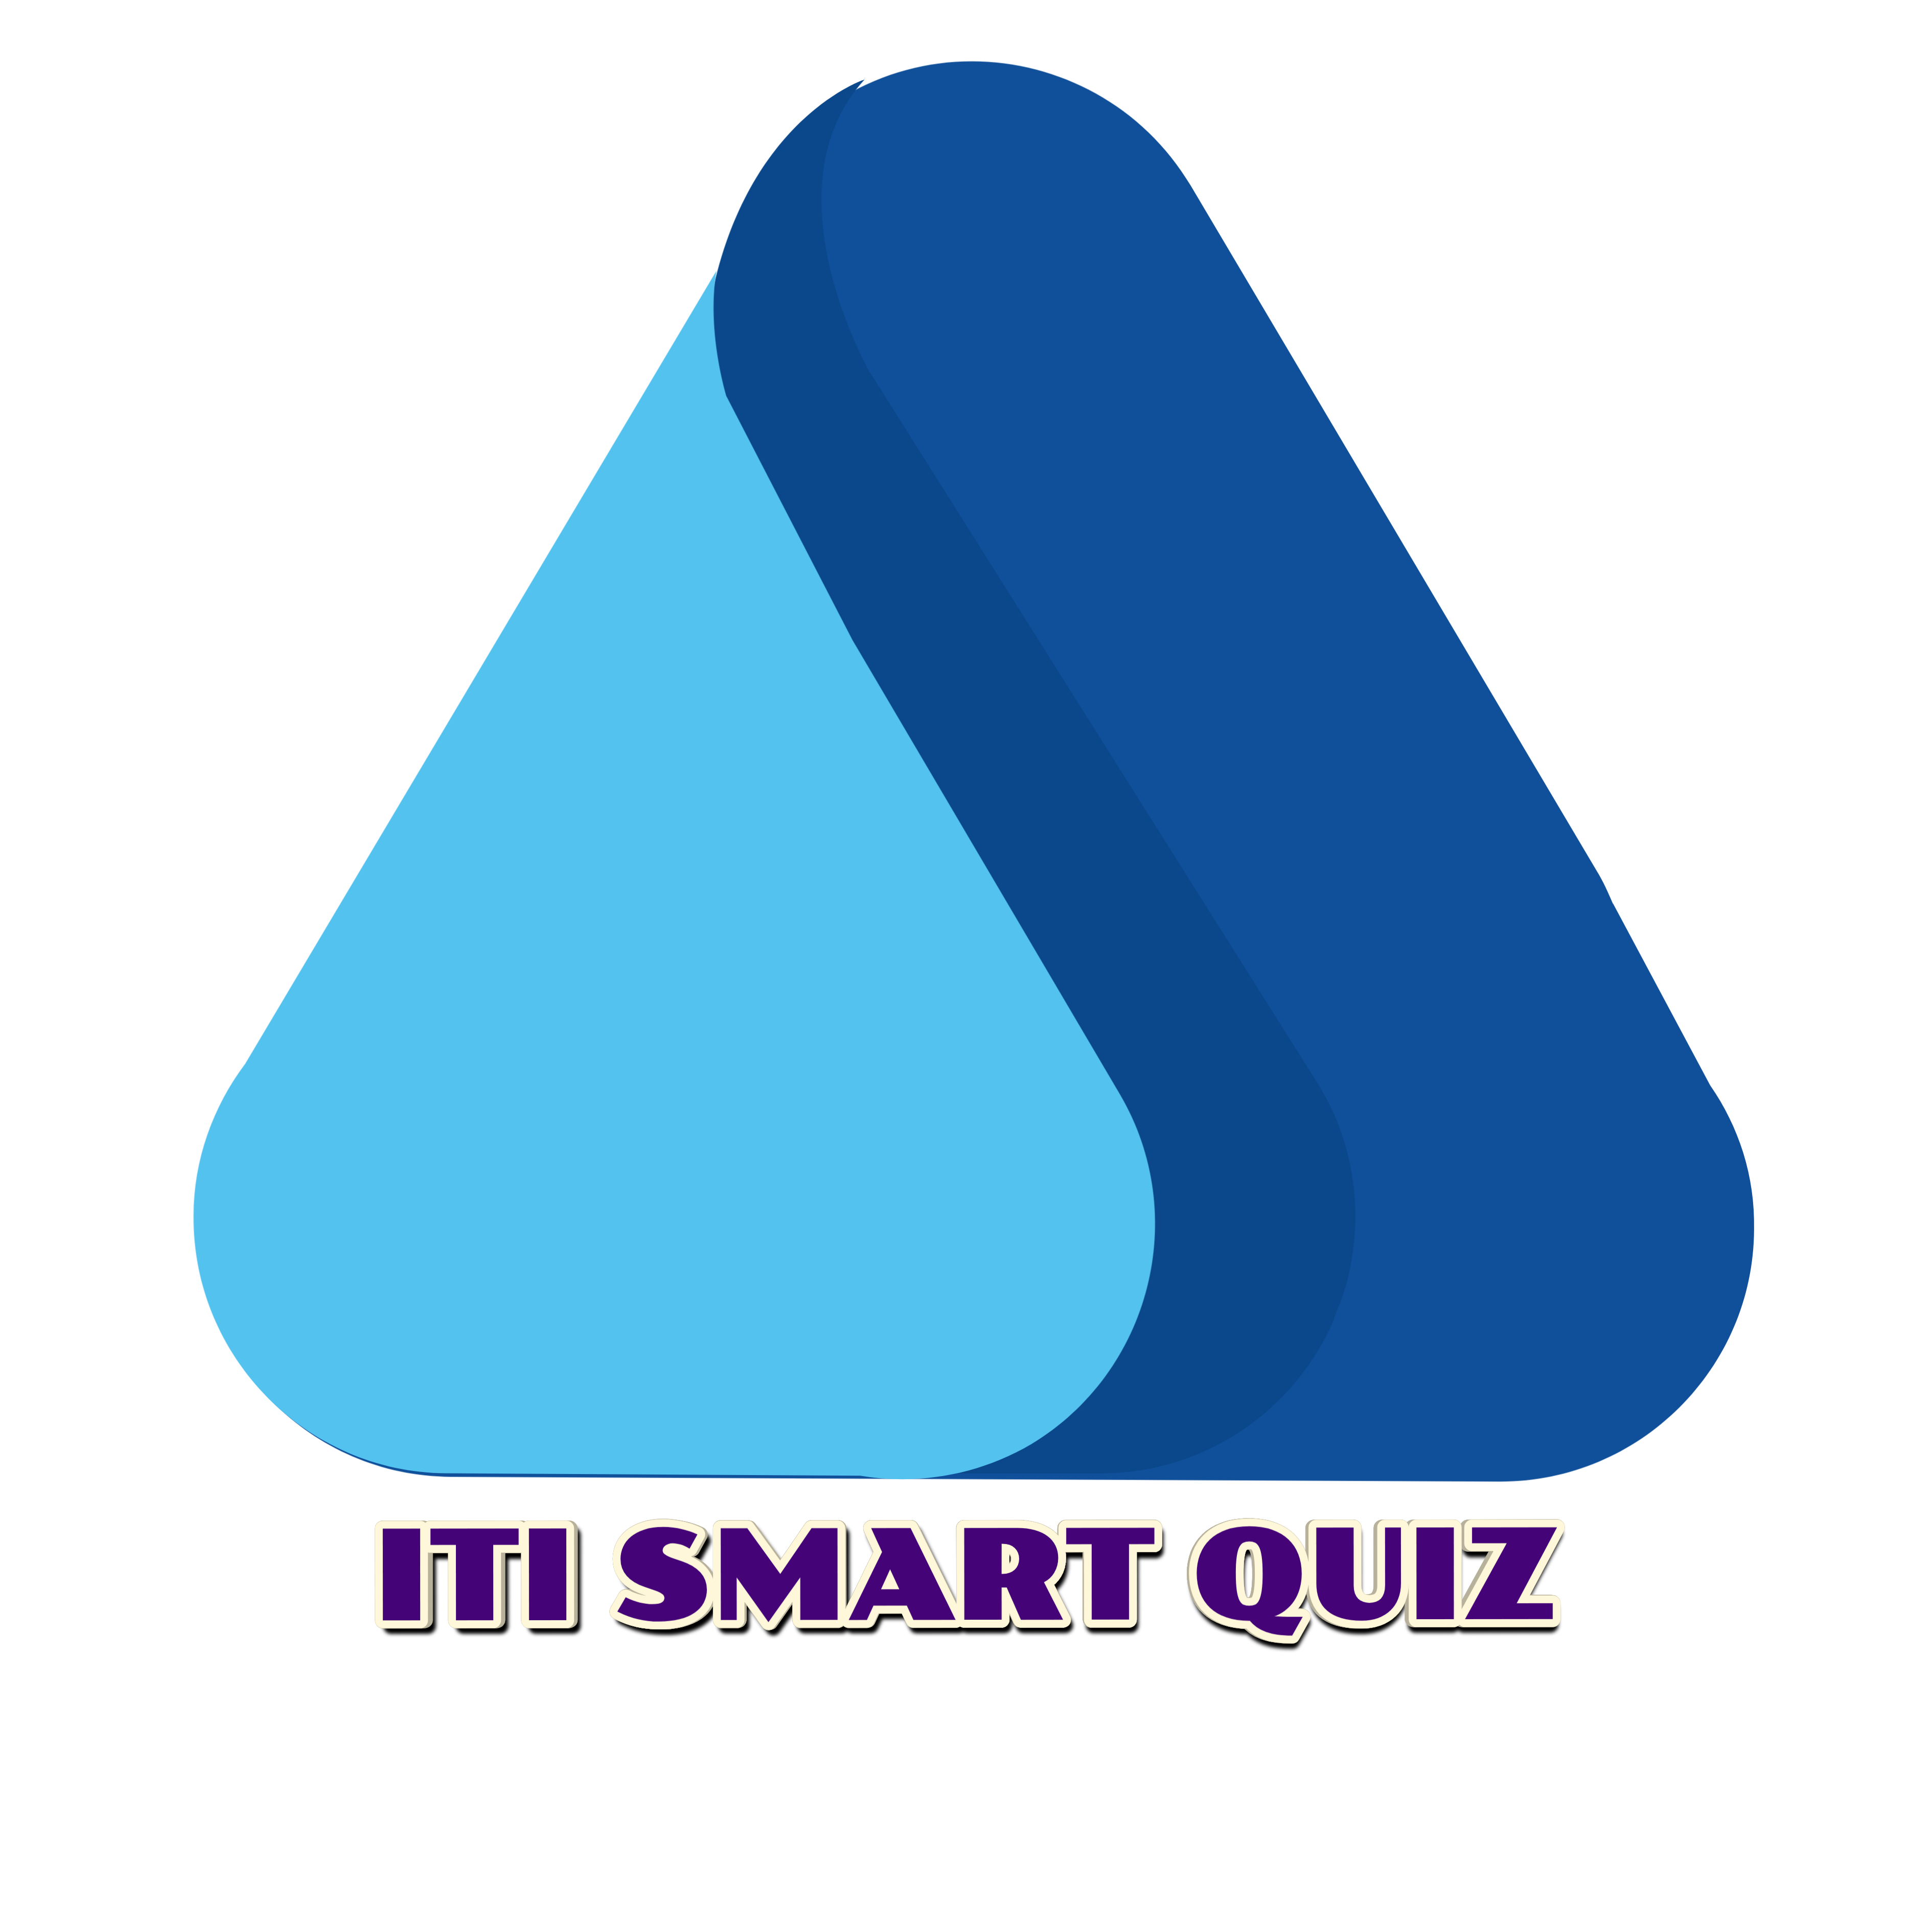 Download Quiz of Kings Logo PNG and Vector (PDF, SVG, Ai, EPS) Free